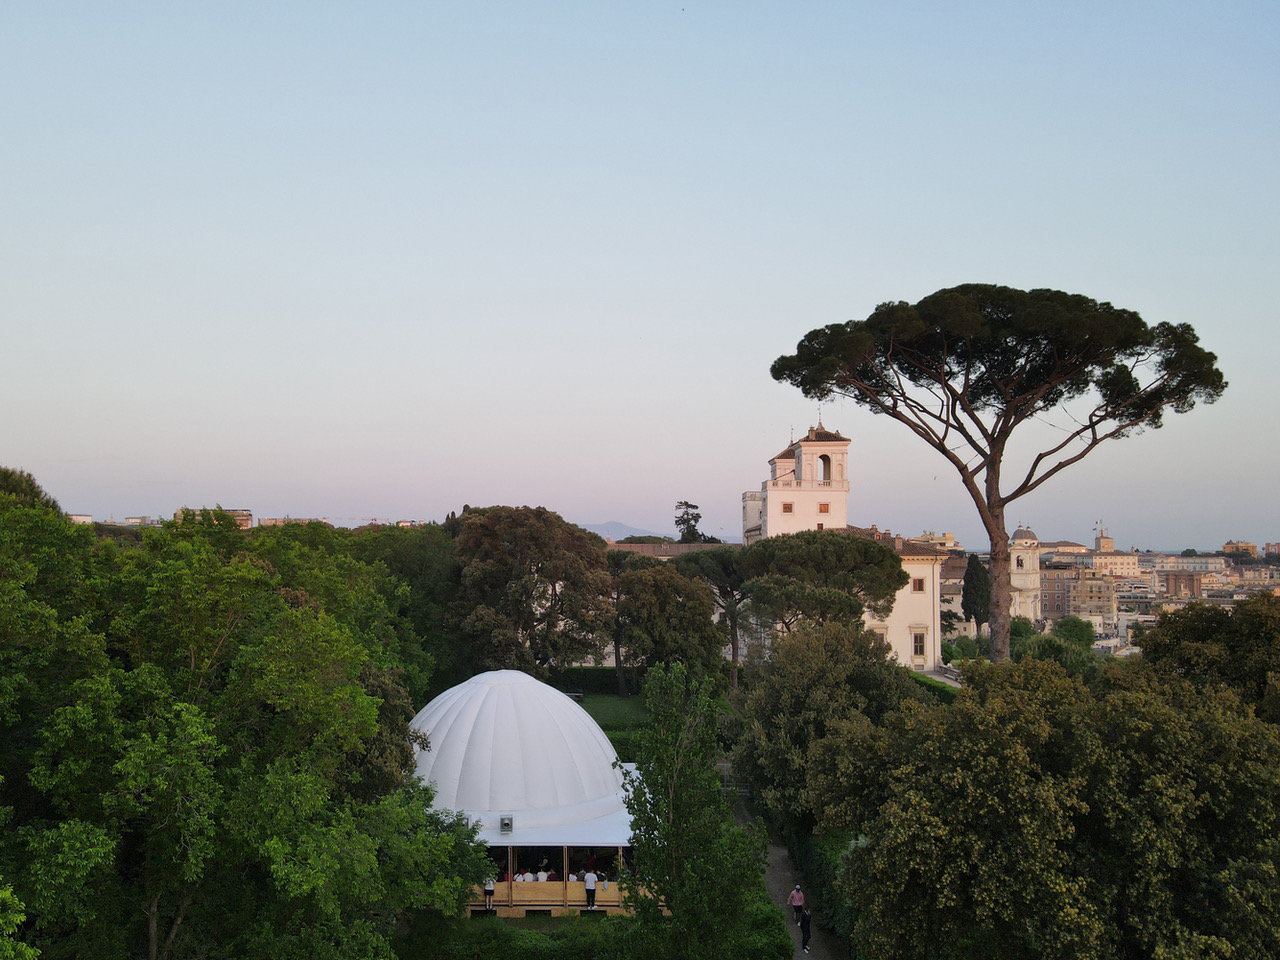 ProtoCAMPO: An Inflatable Dome-Shaped Pavilion for the Villa Medici in Rome